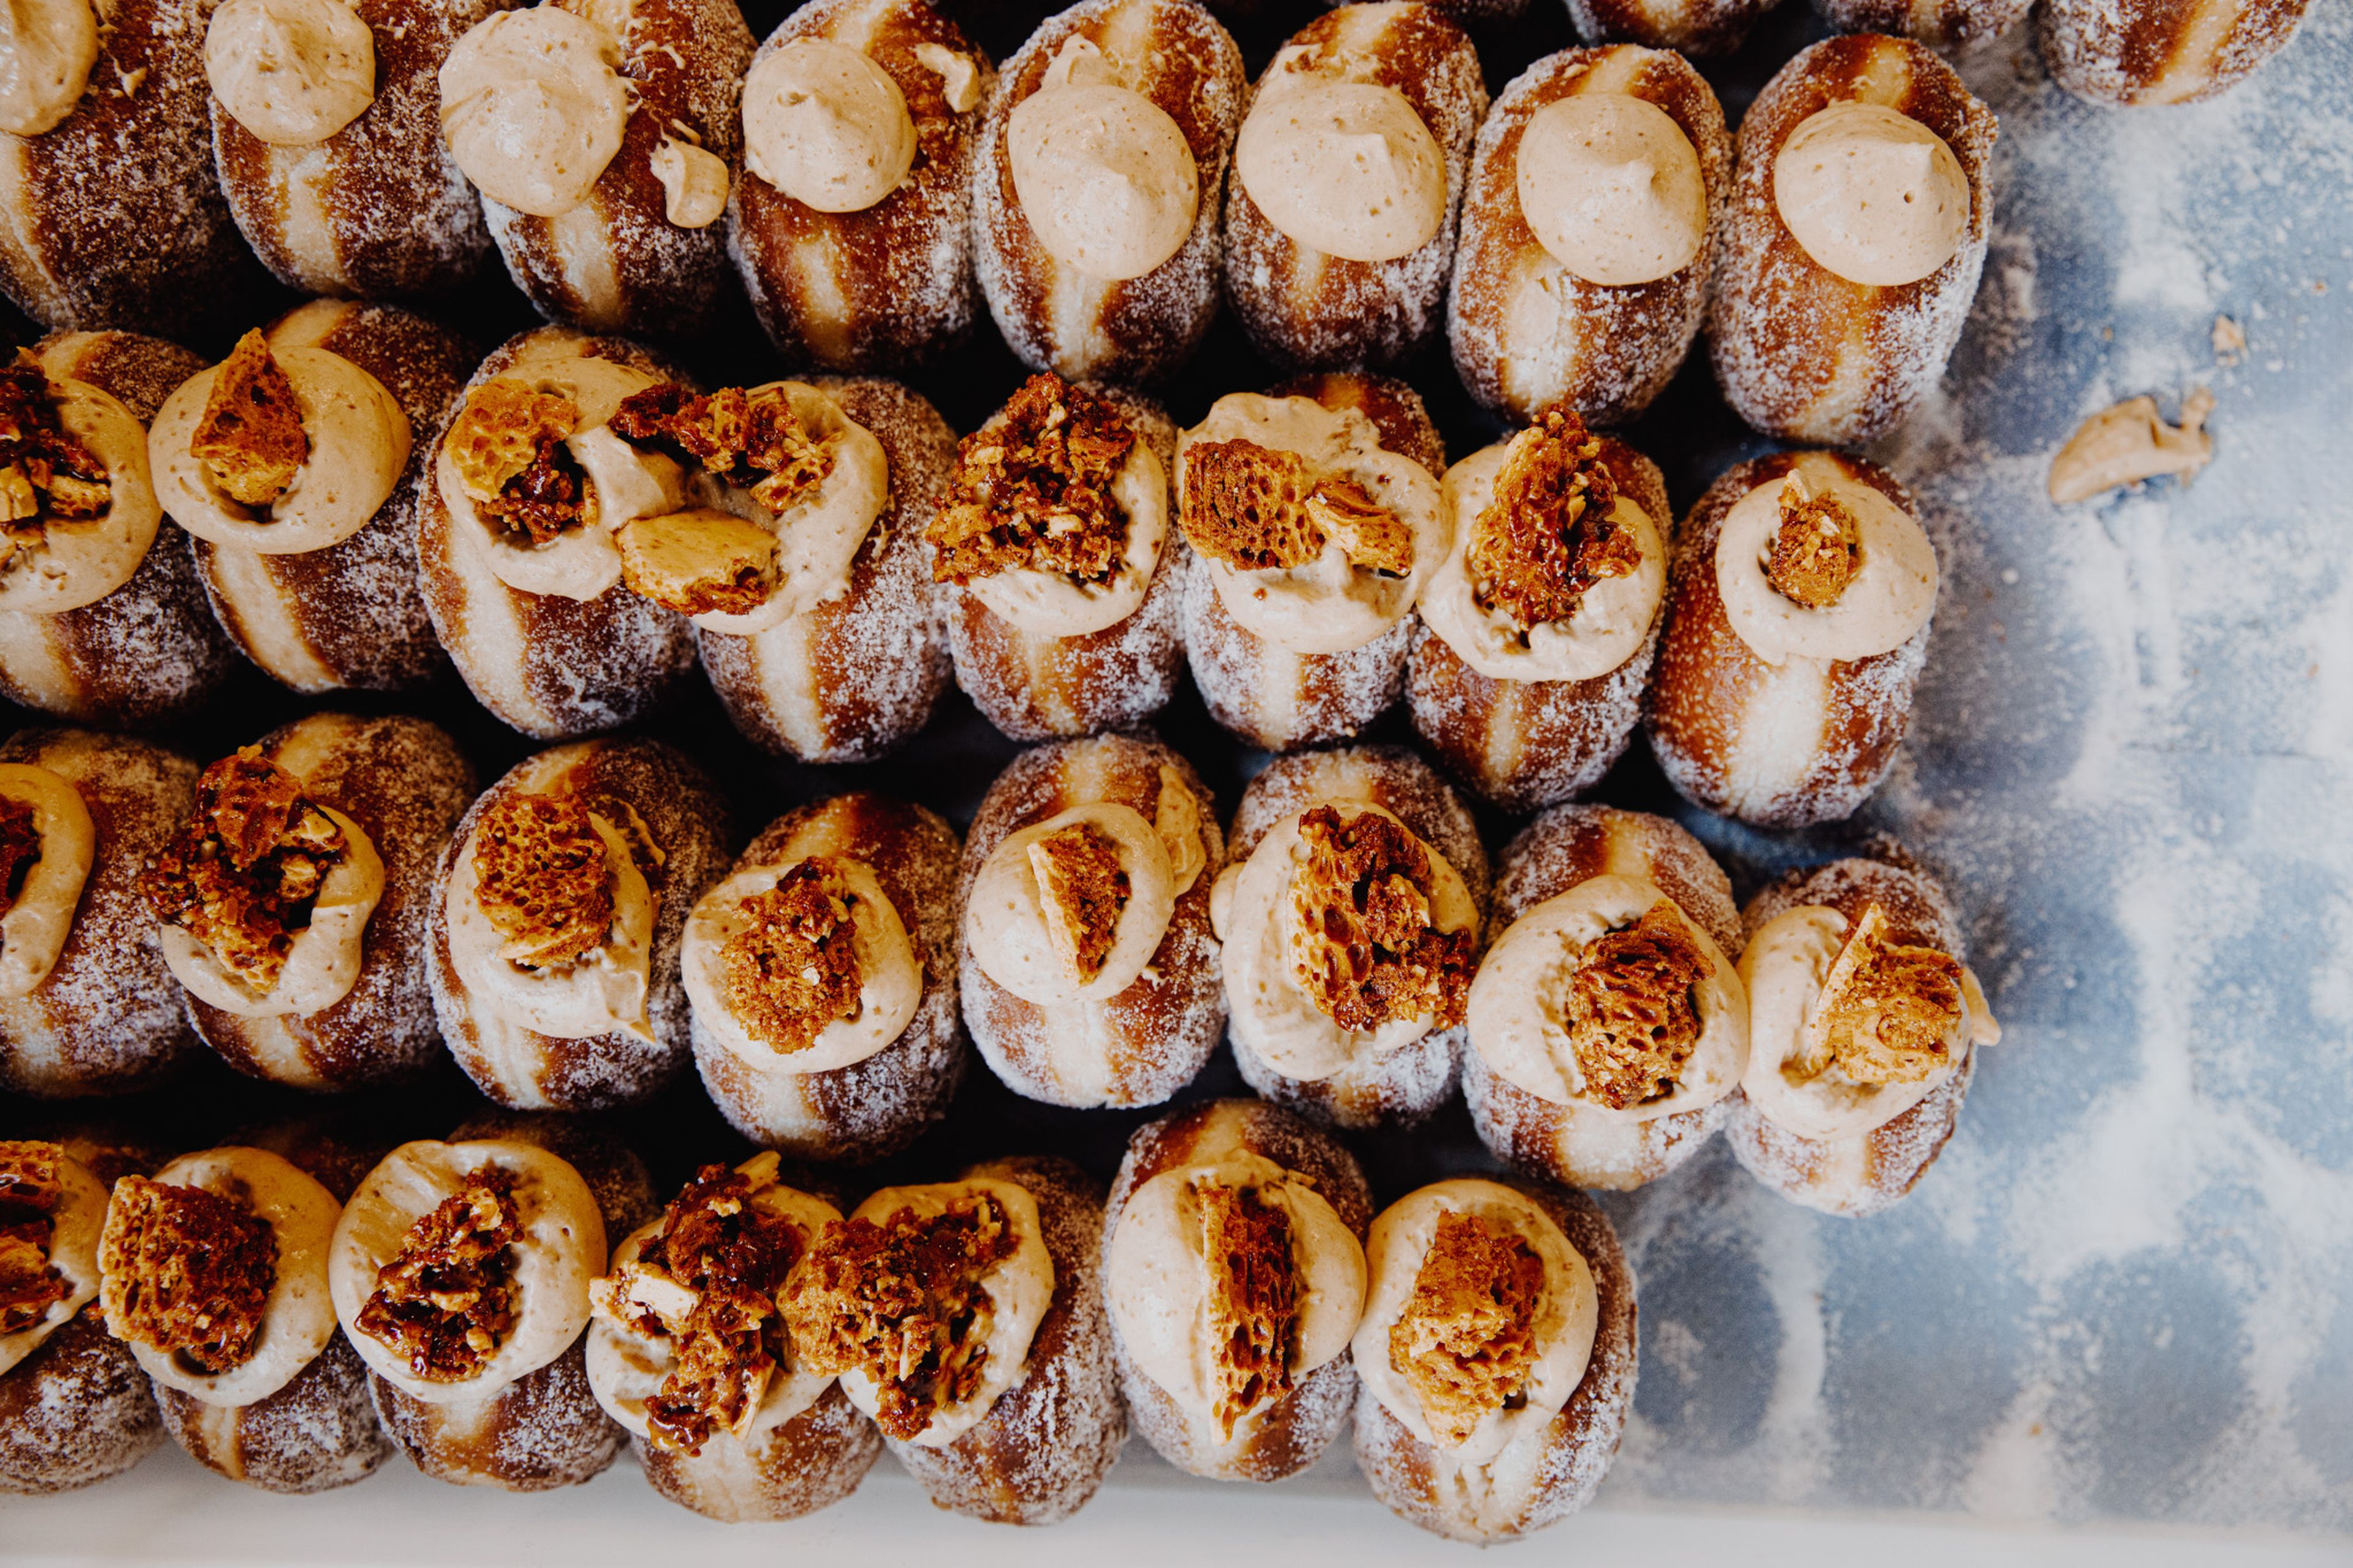 5 Can't-Miss Snacks and Experiences at Borough Market